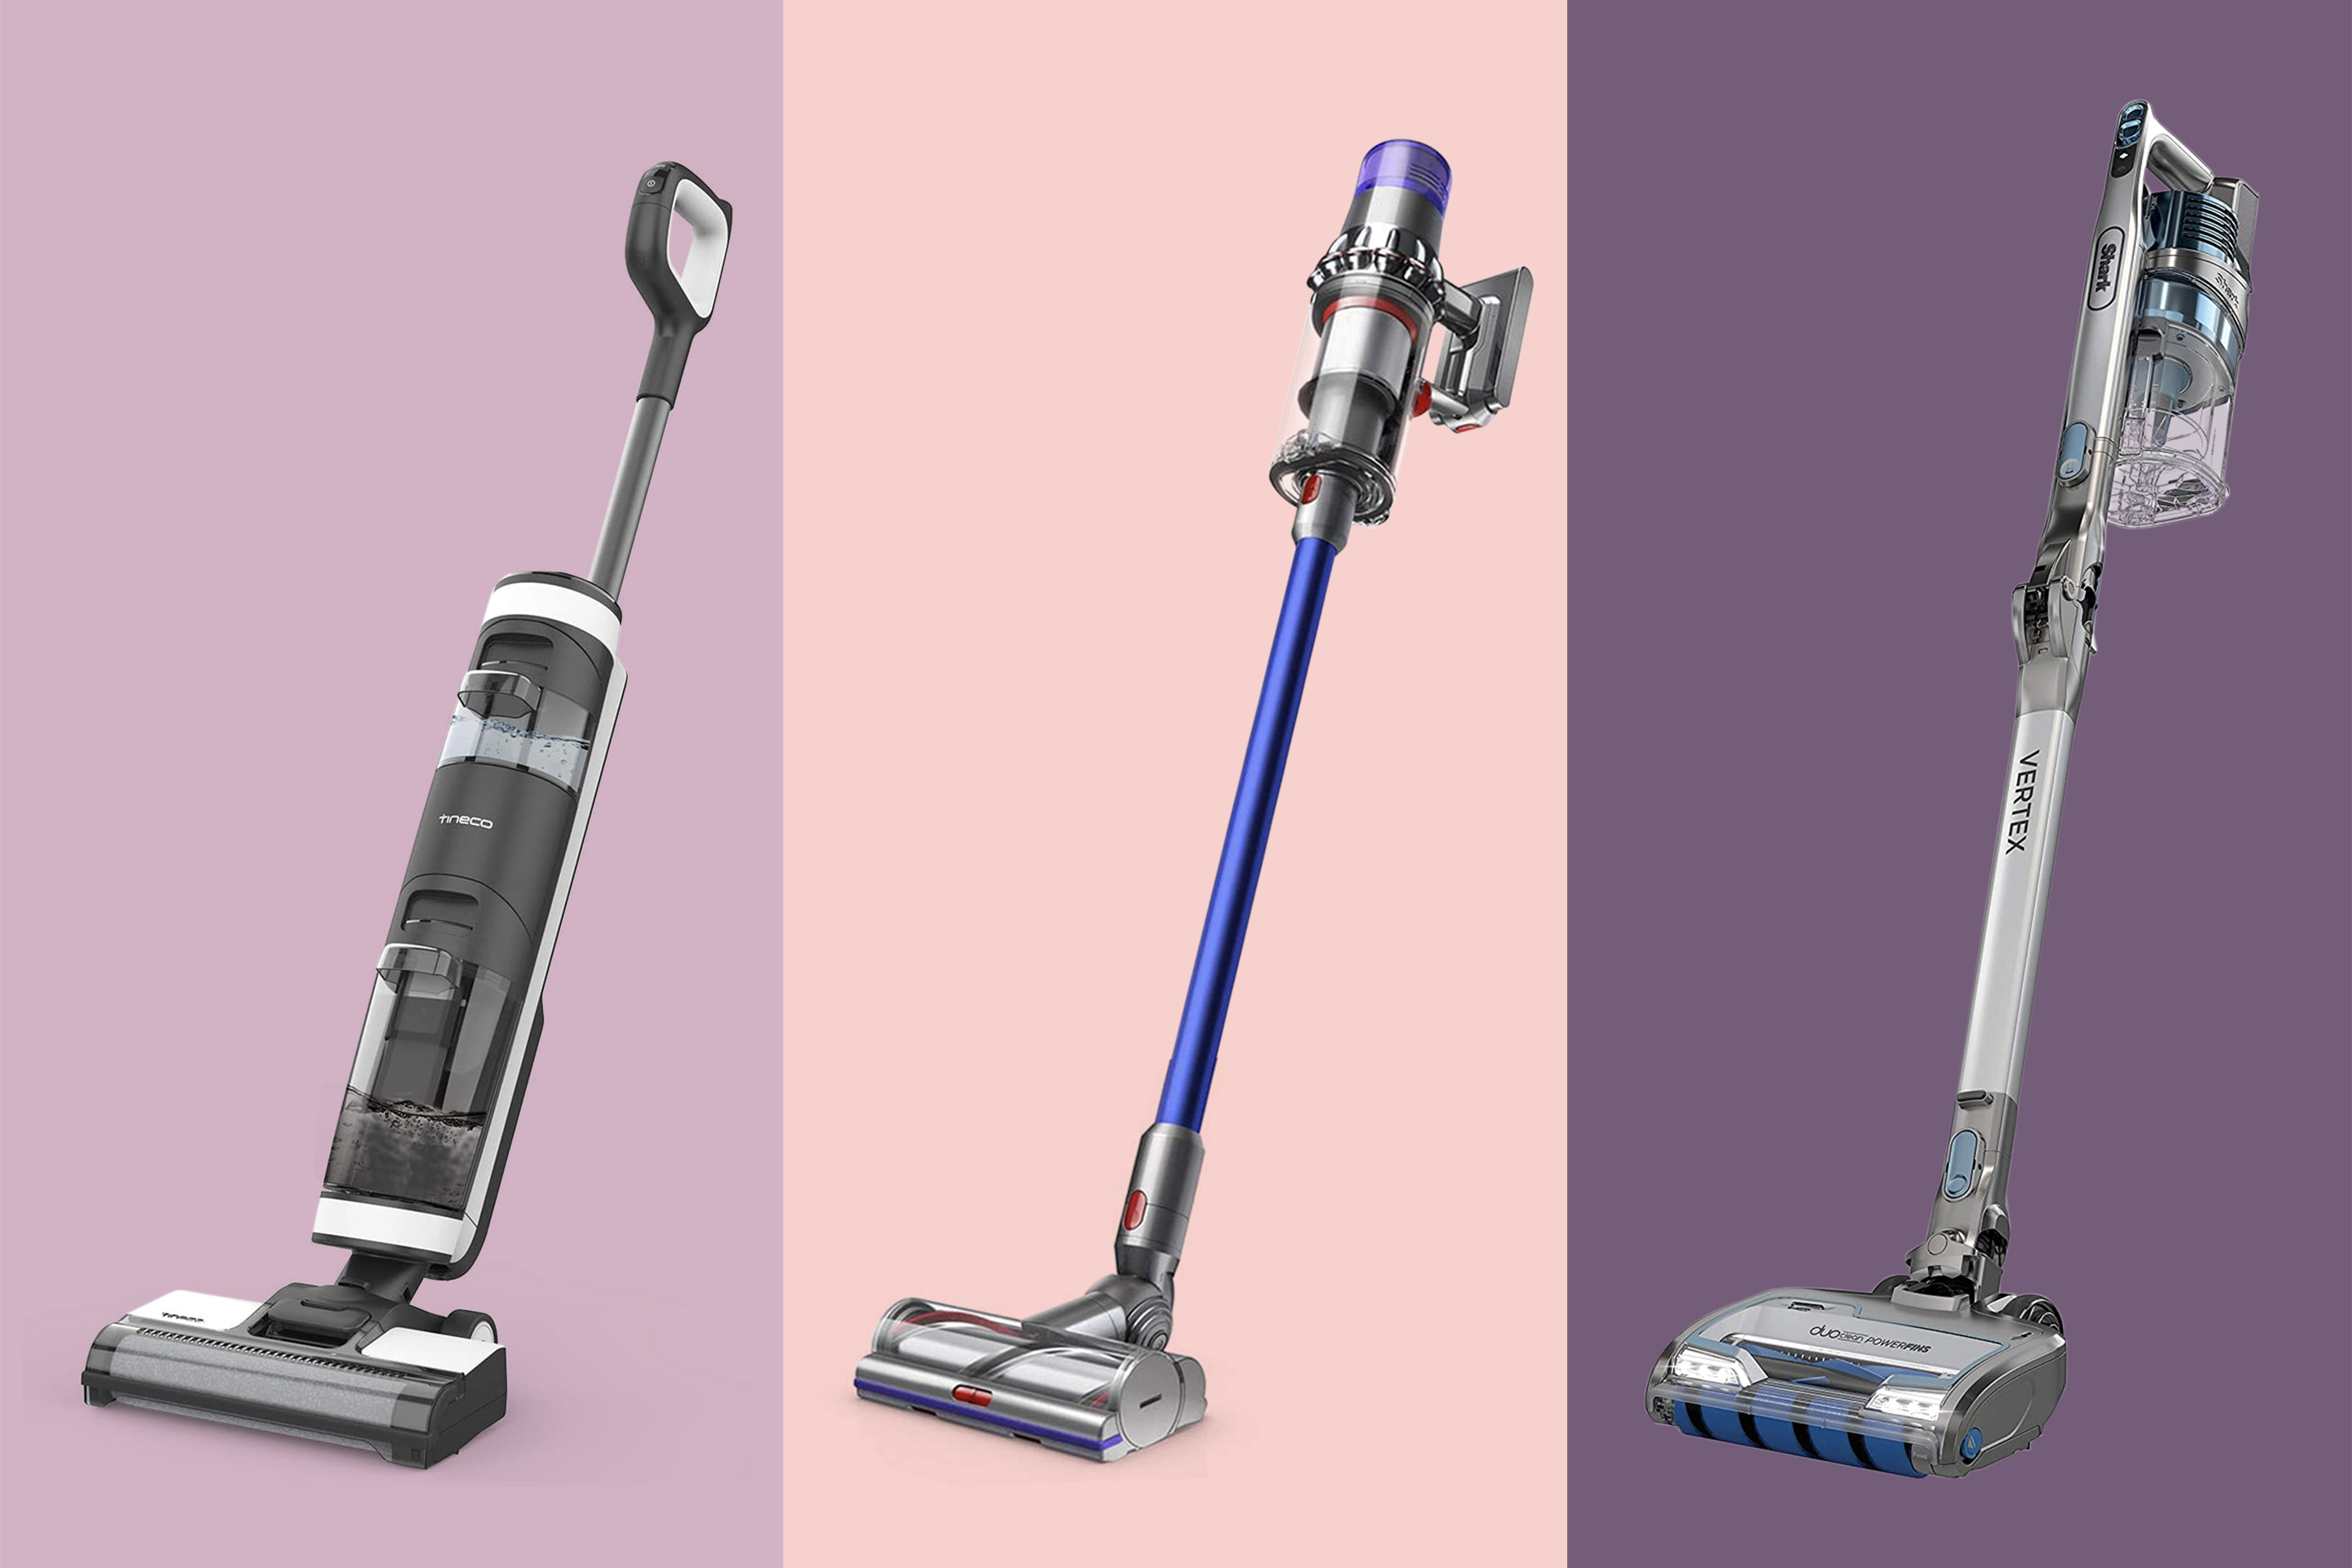 Best Cordless Vacuum Cleaner For 2021, Best Cordless Vacuum For Hardwood And Tile Floors